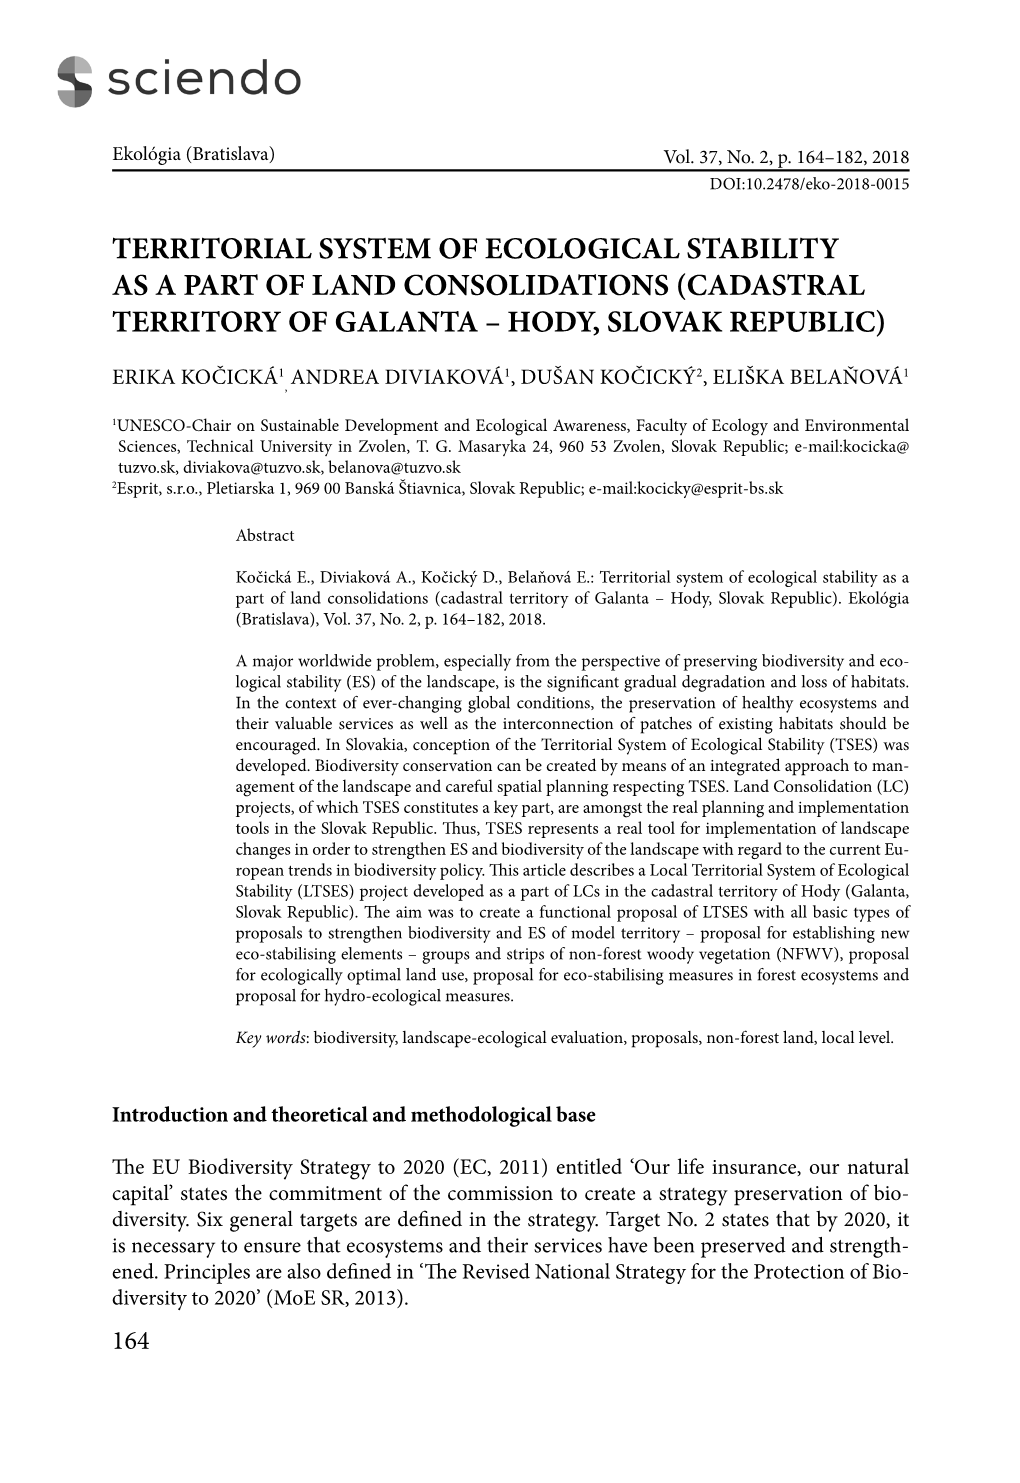 Territorial System of Ecological Stability As a Part of Land Consolidations (Cadastral Territory of Galanta – Hody, Slovak Republic)